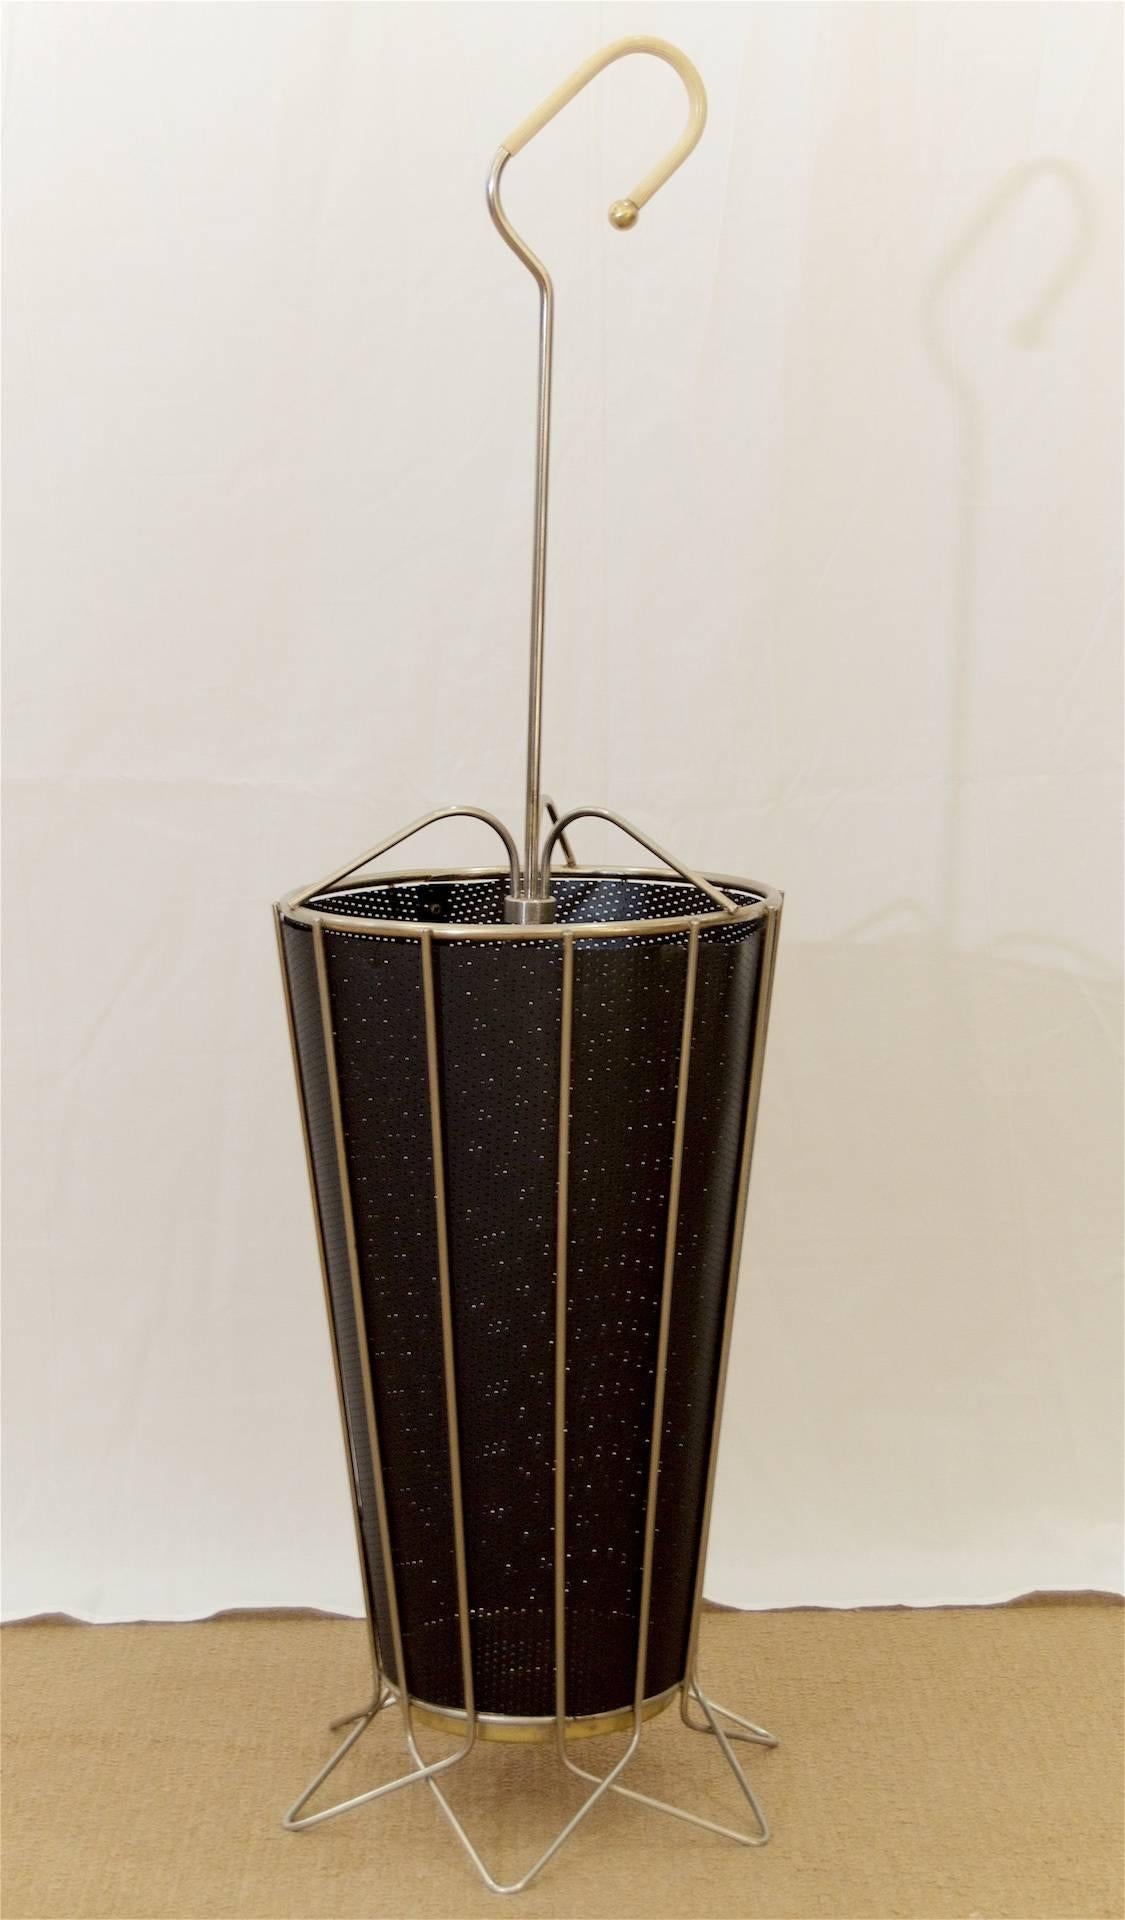 Well-sized umbrella stand, the body of steel wire (originally brass plated, significant loss to brass finish), sides lined with a perforated black synthetic liner. Brass tray rests in centre of base. 

Height shown is to top of handle. Height to